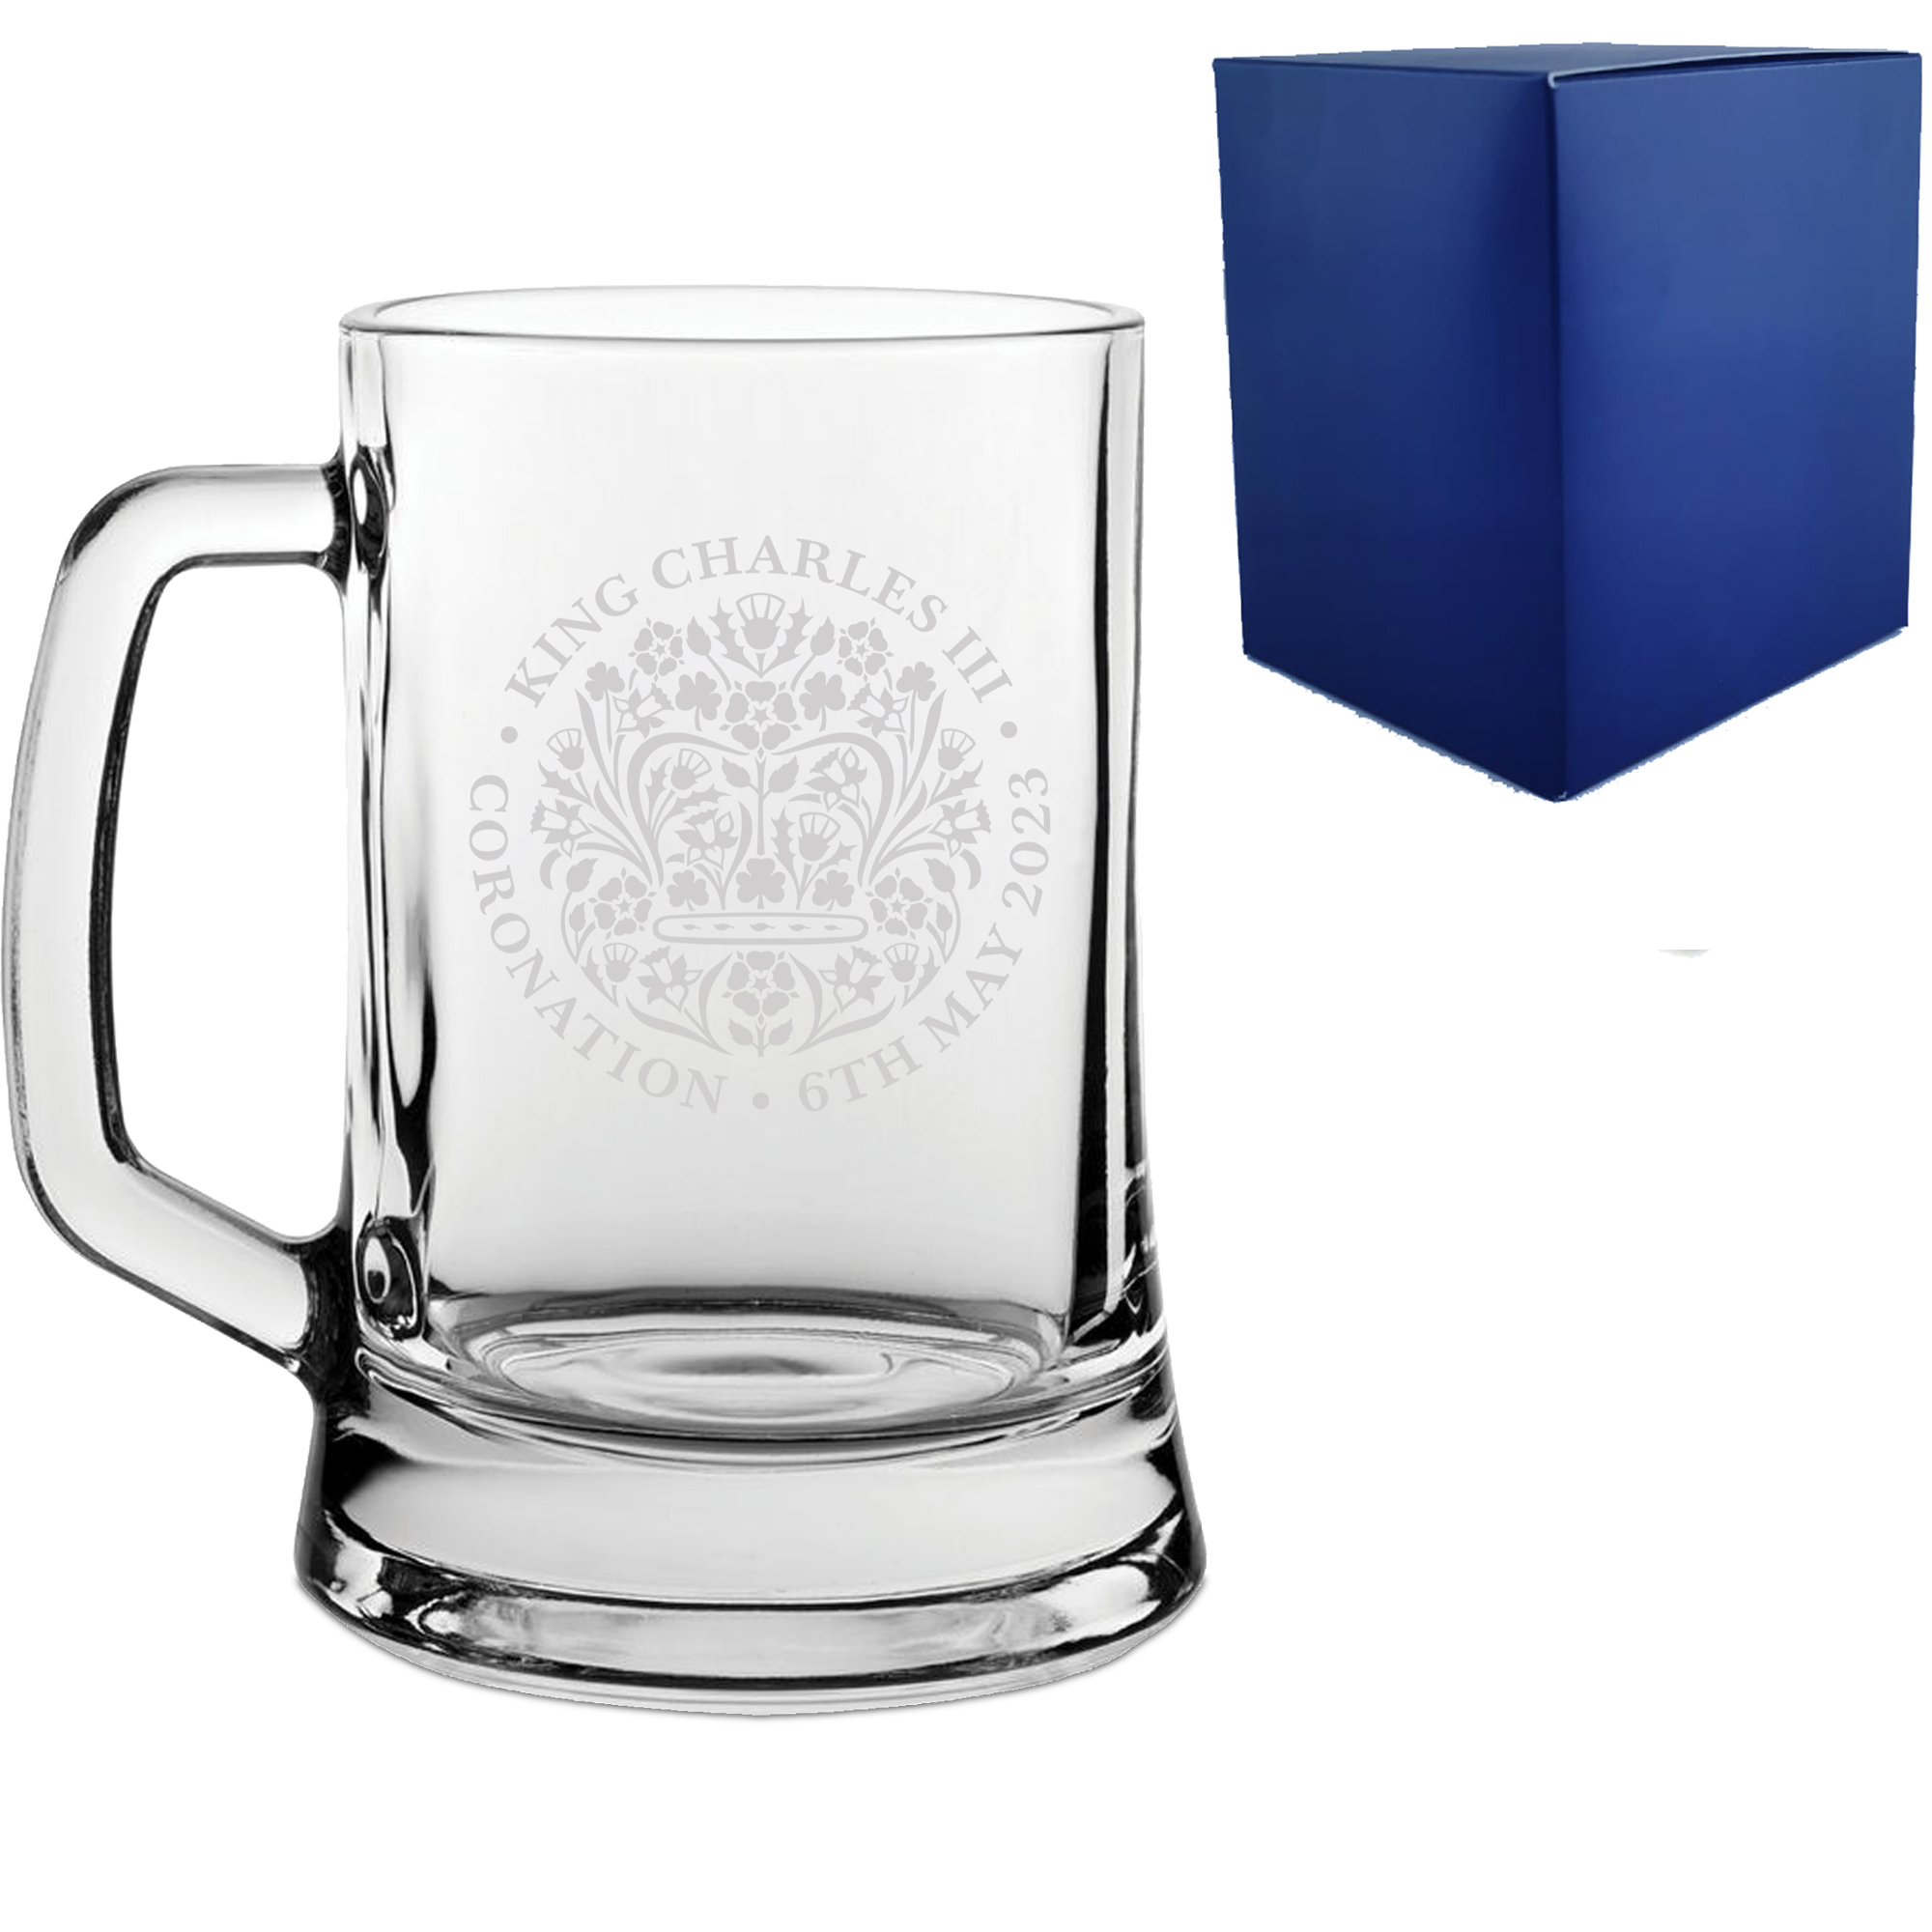 Personalized Pint Glass - Engraved with Your Name and/or Text - 500 ml - Dishwasher Safe - High-Quality Laser Engraving